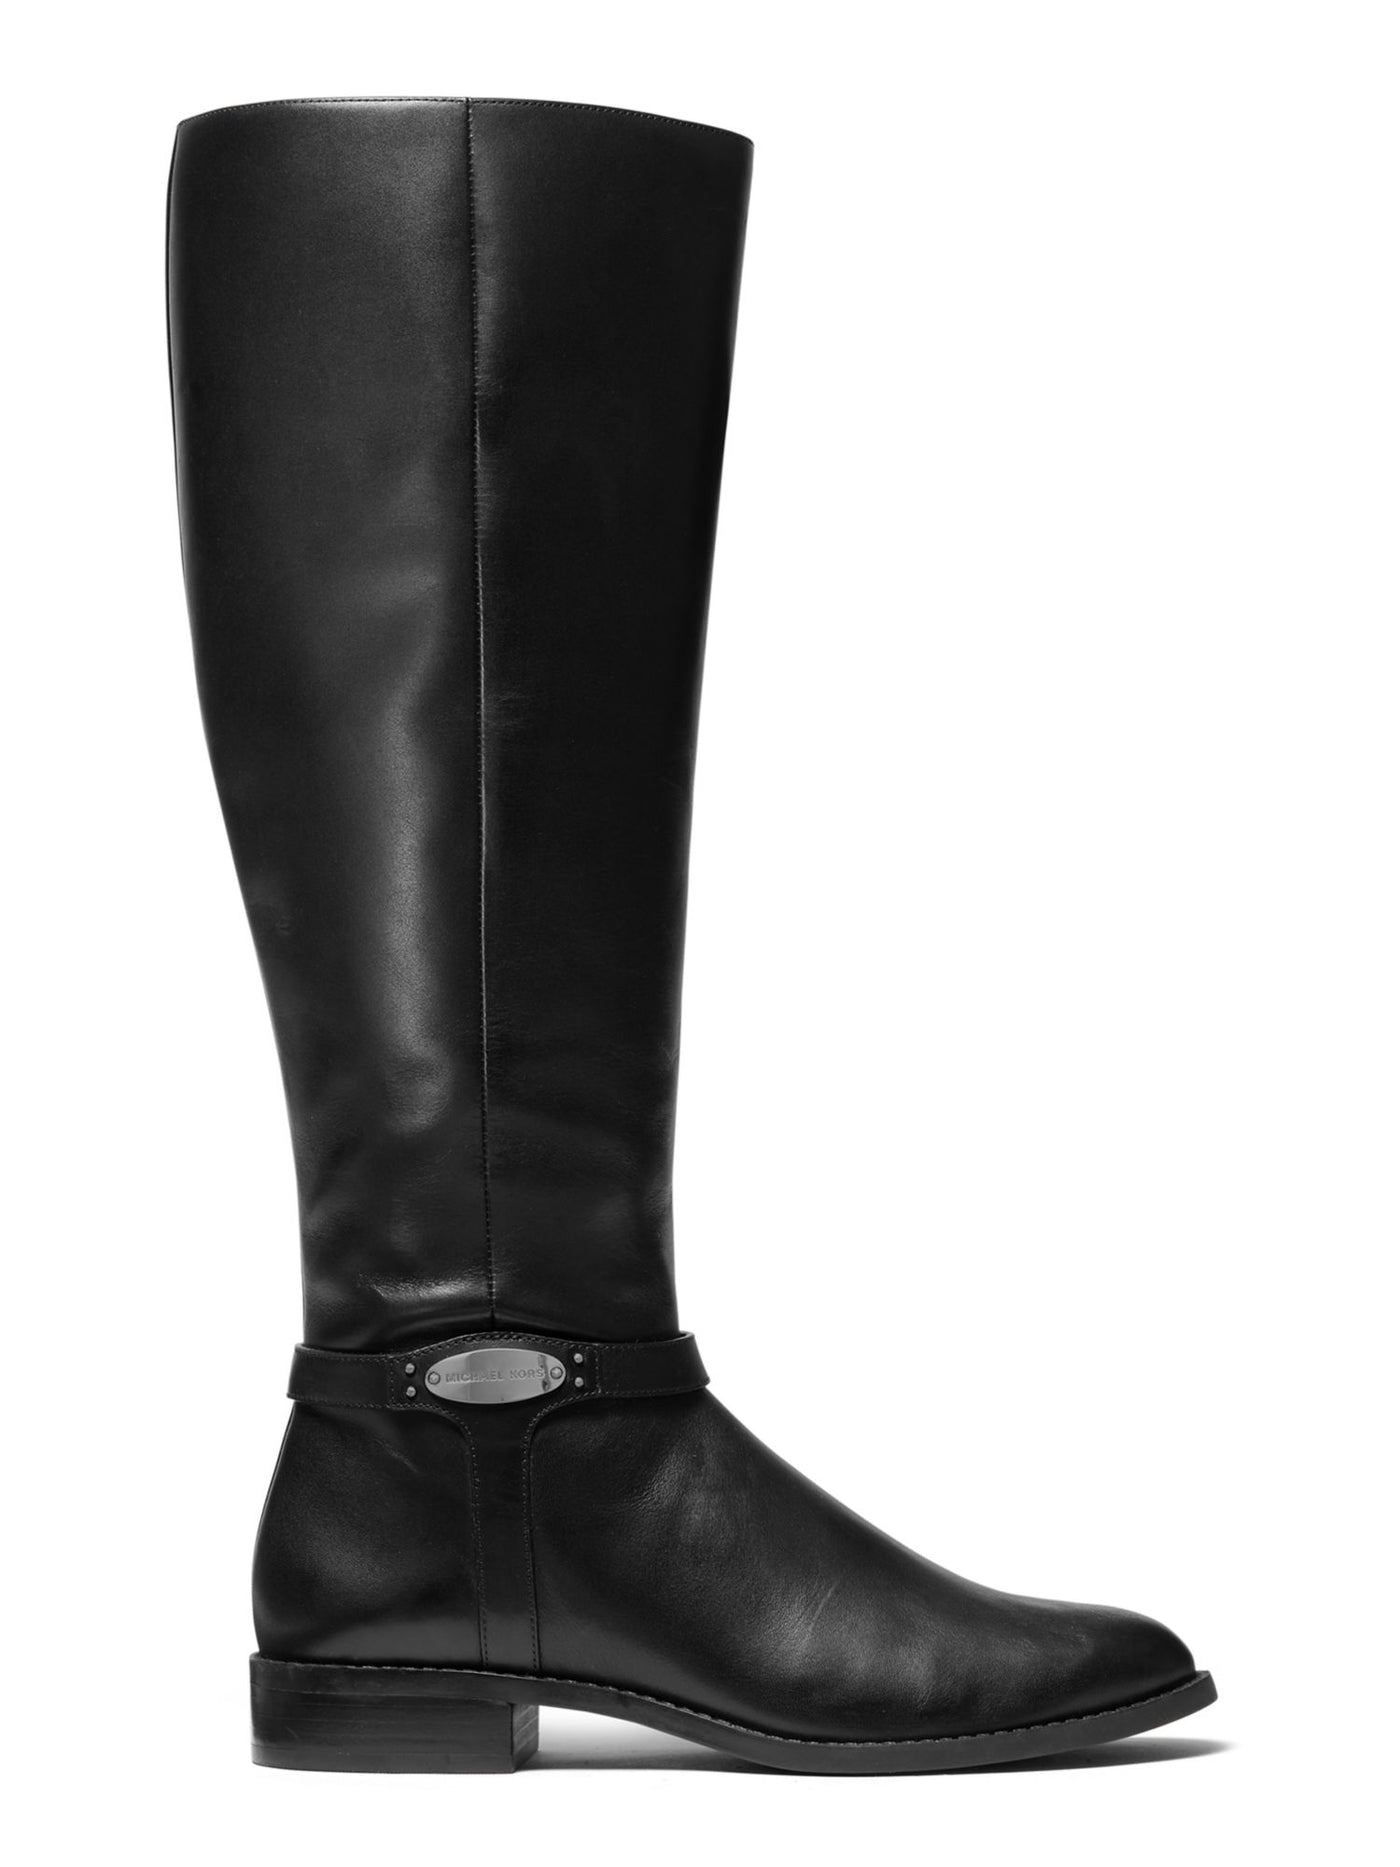 MICHAEL KORS Womens Black Buckle Accent Stacked Heel Zip-Up Leather Boots 6 M